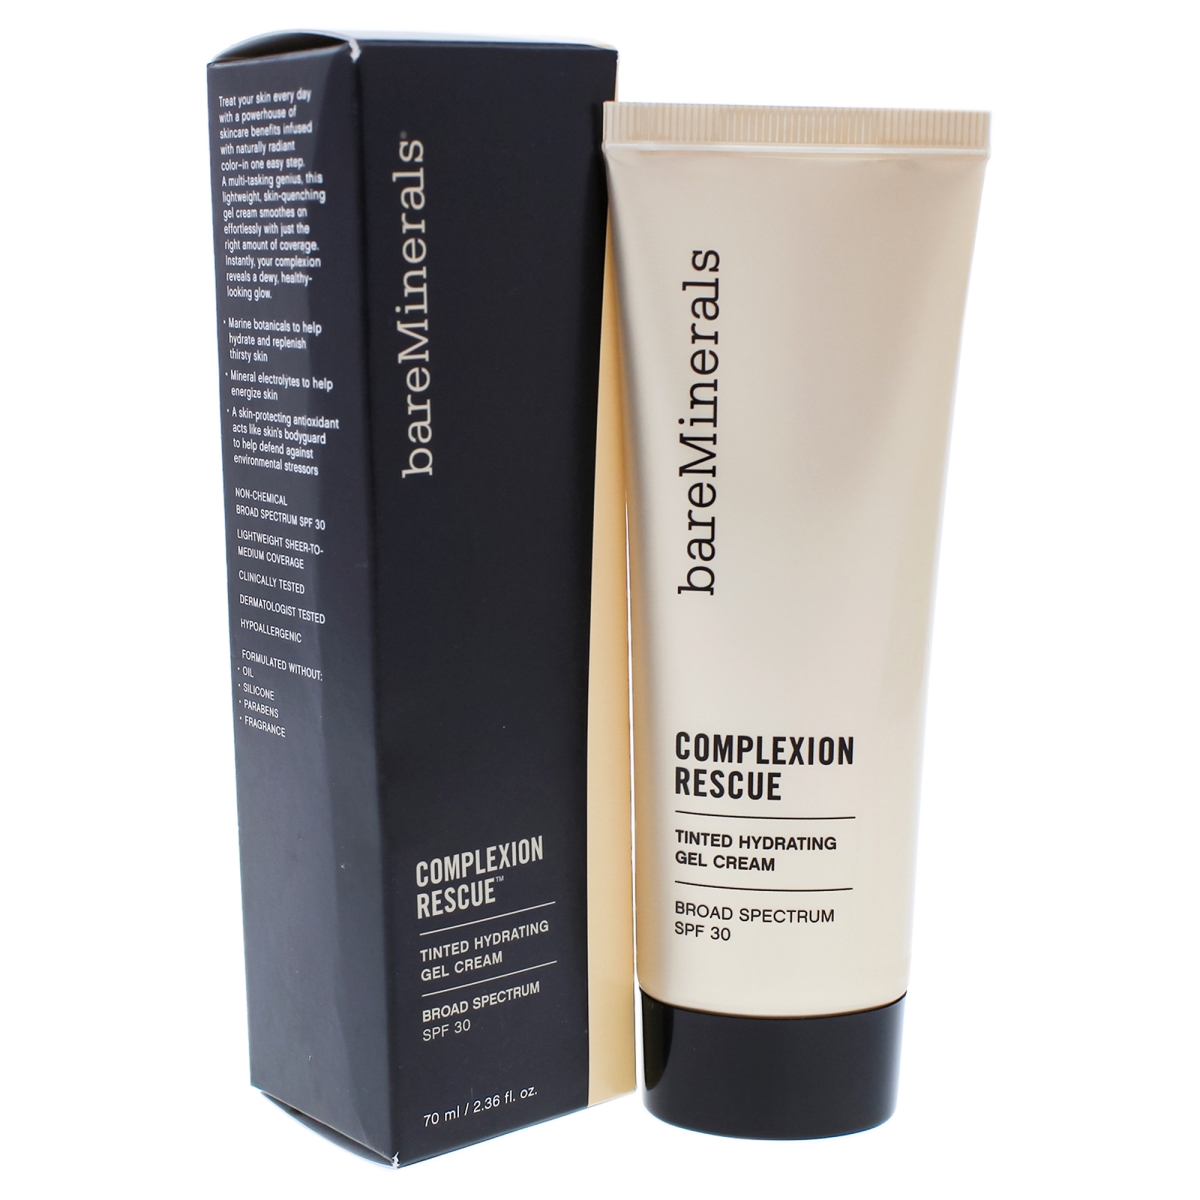 I0085642 2.36 Oz Complexion Rescue Tinted Hydrating Gel Cream Spf 30 For Womens - 02 Vanilla